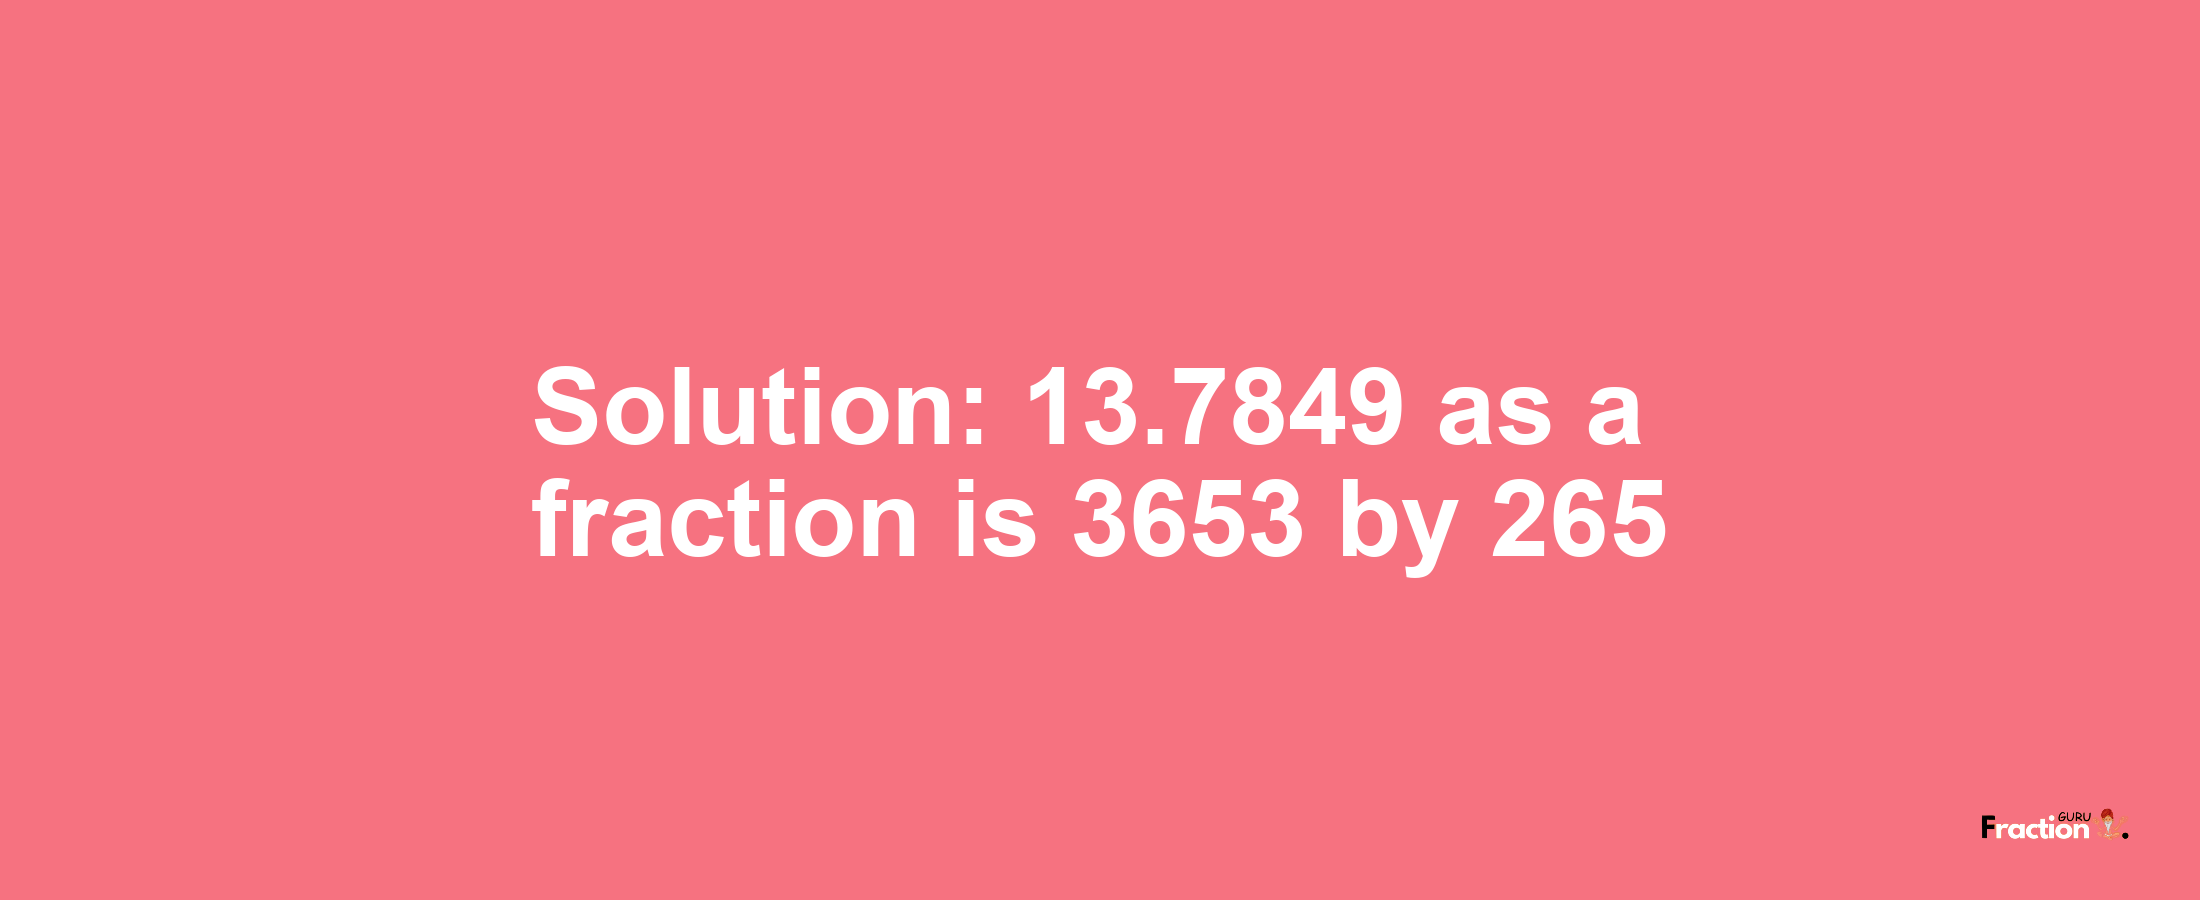 Solution:13.7849 as a fraction is 3653/265